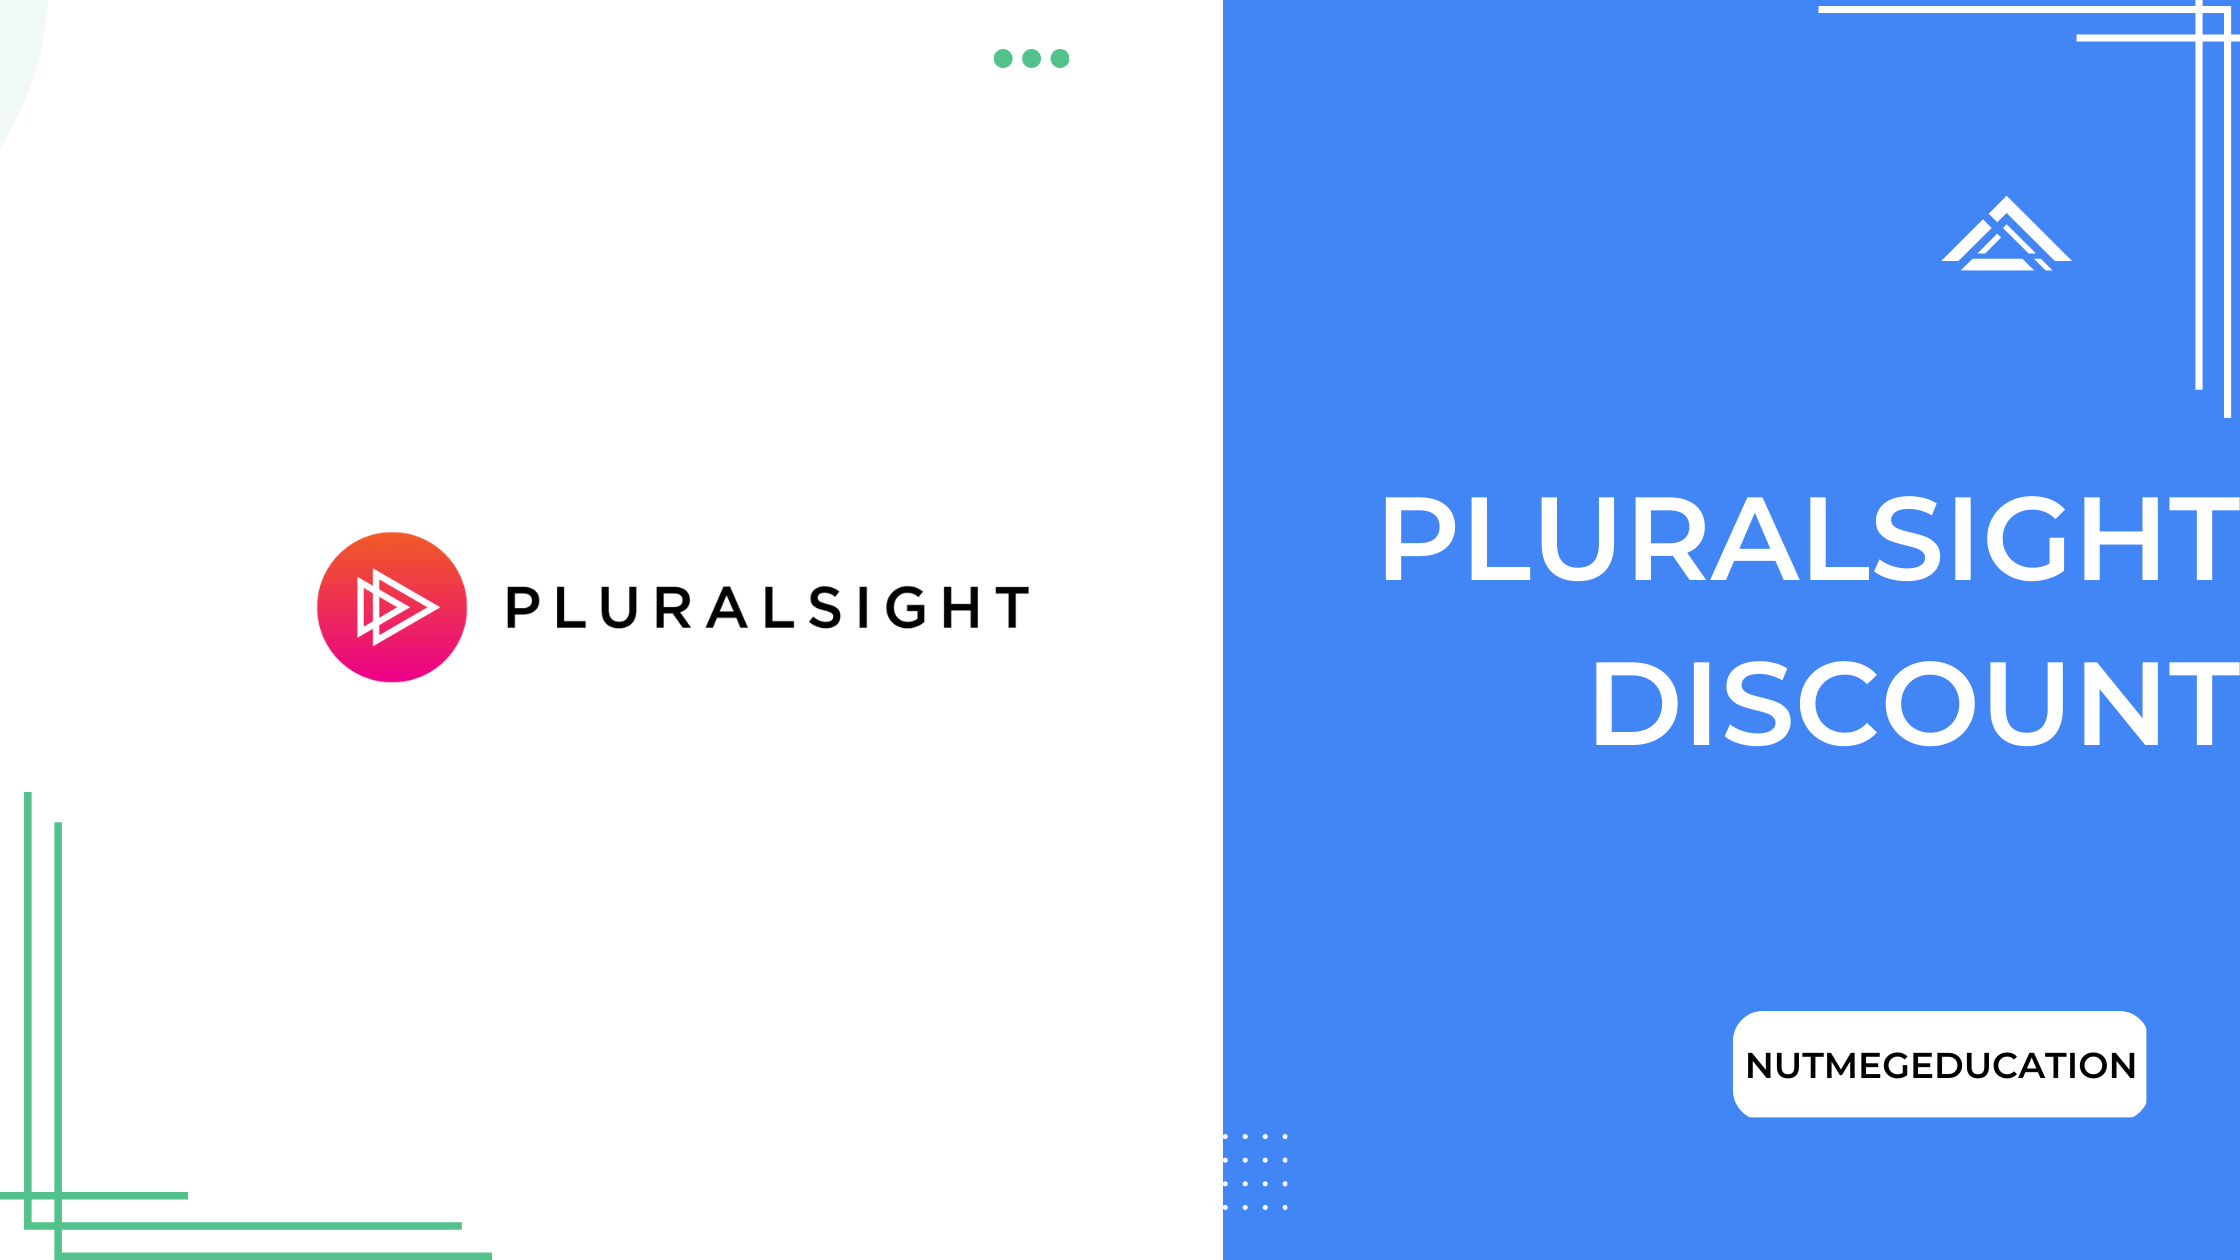 Pluralsight Discount - NutMegEducation